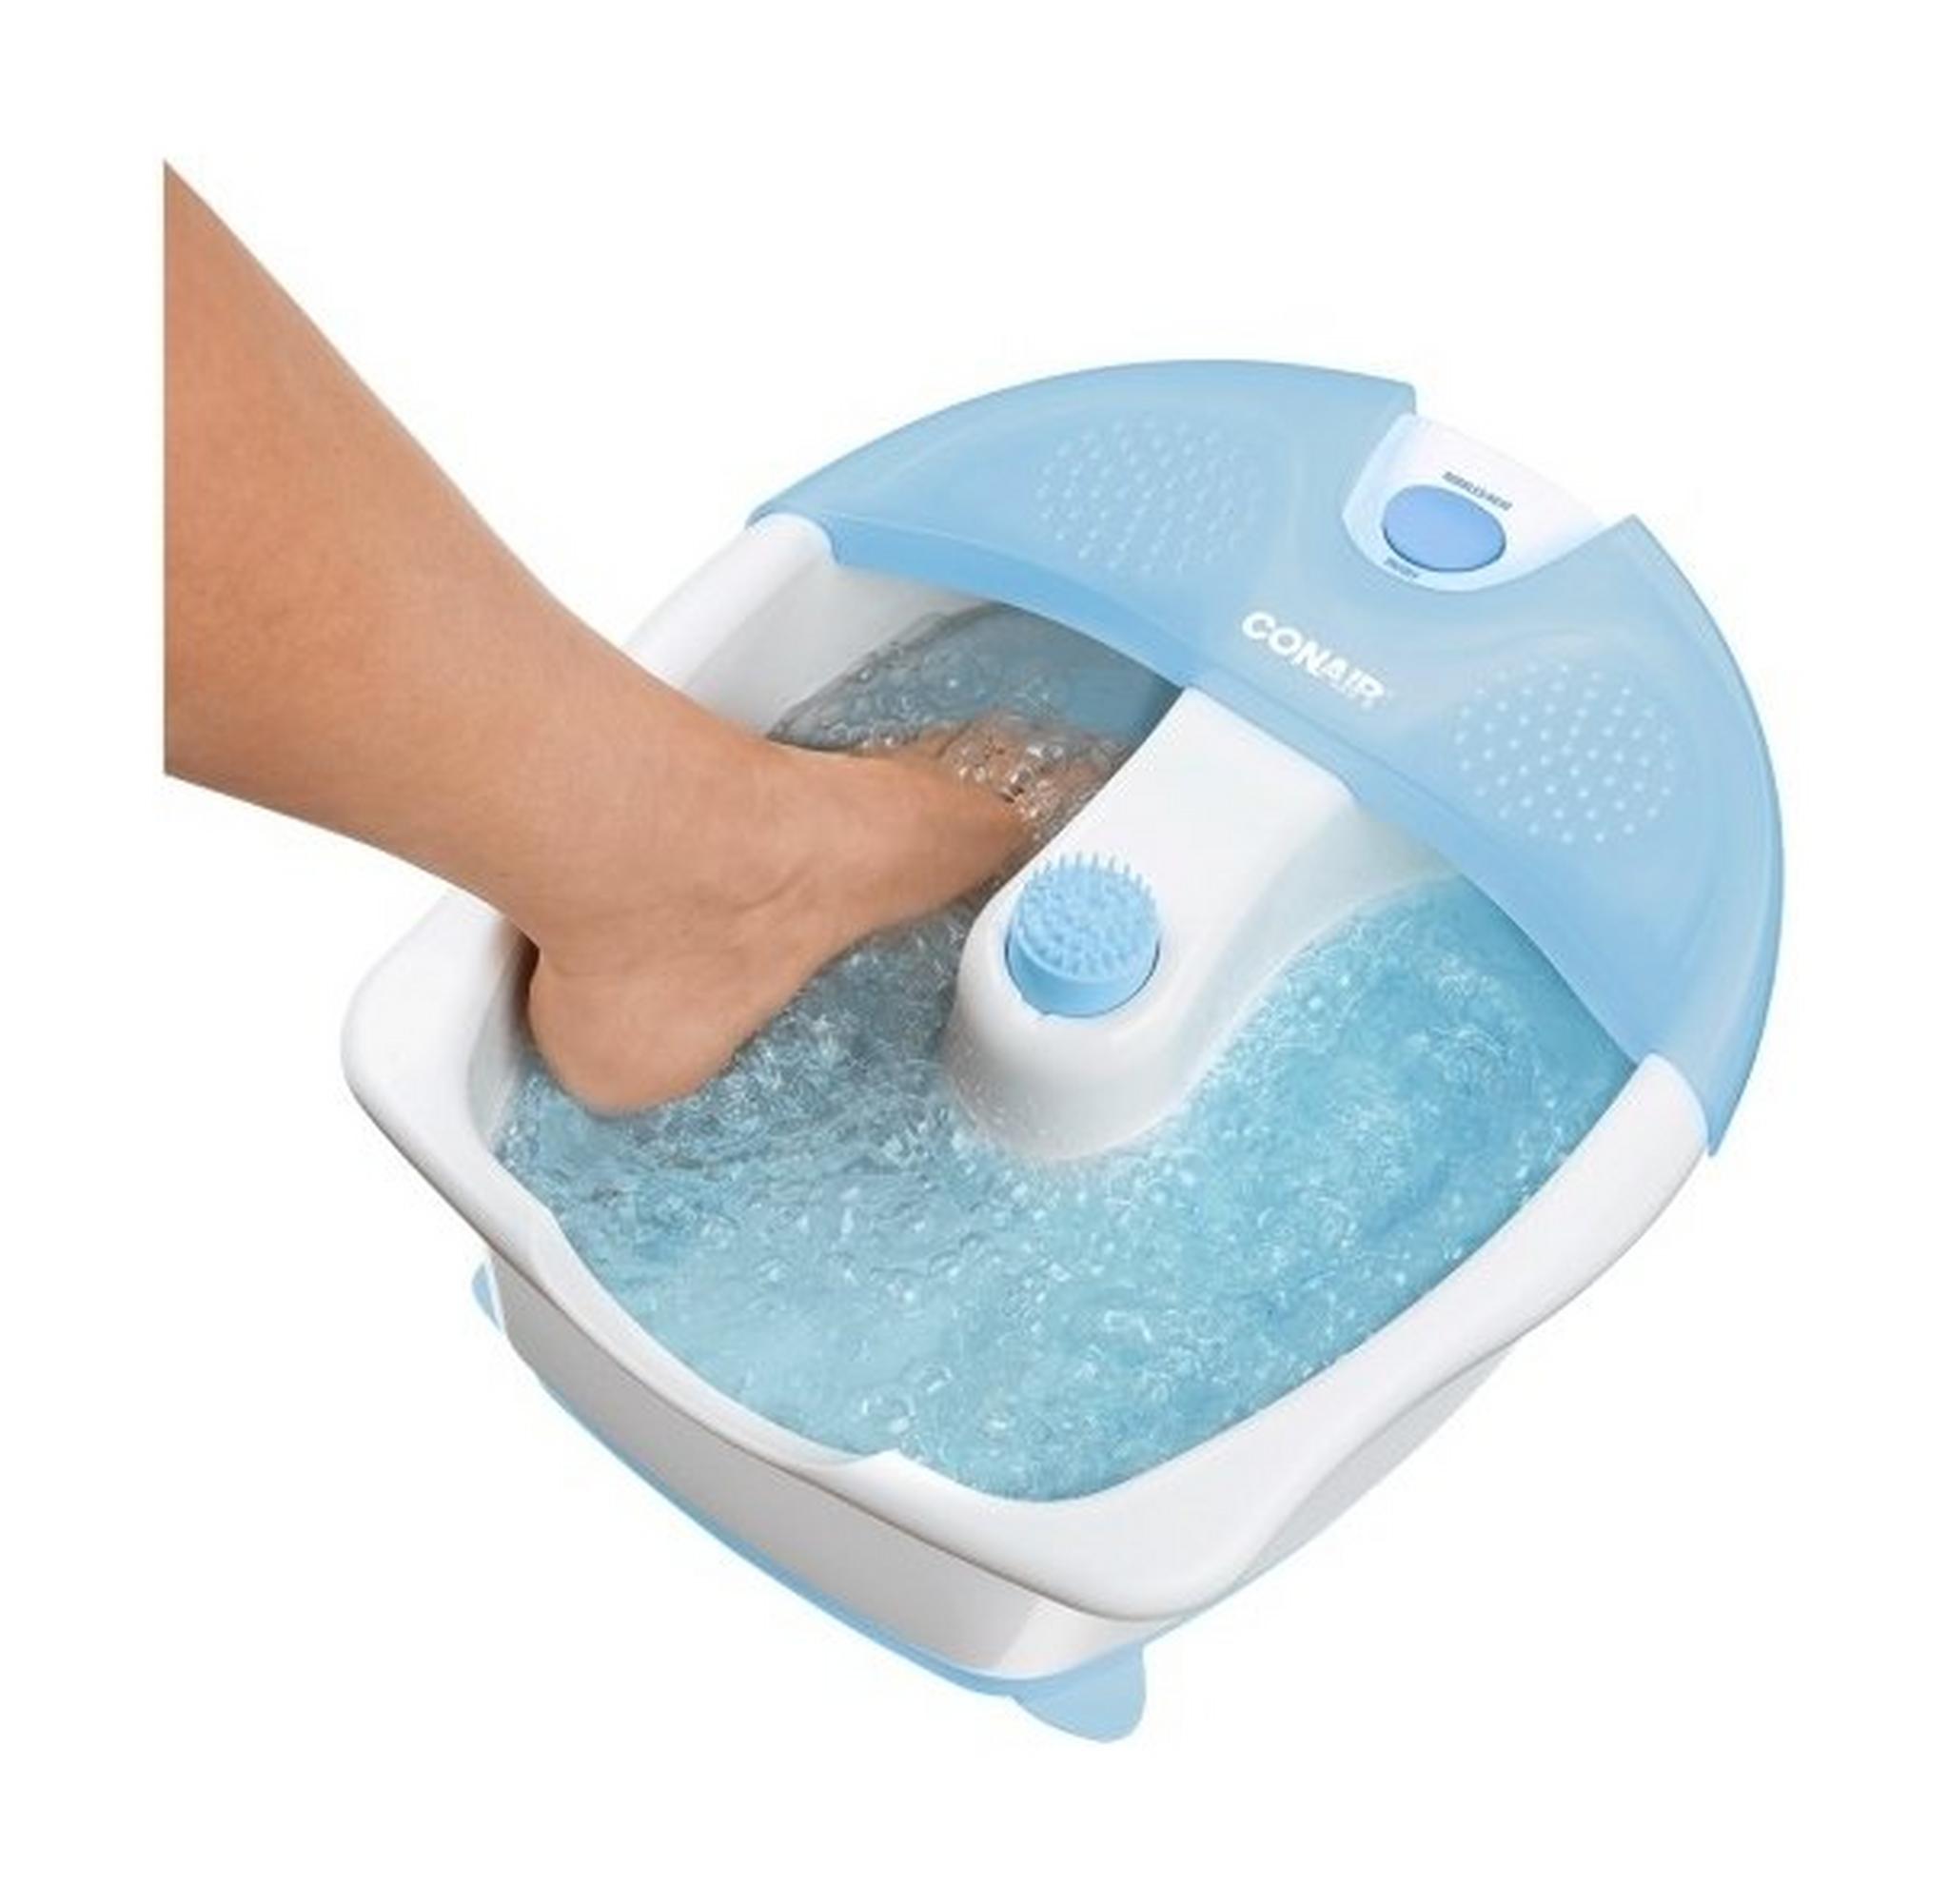 Conair Foot Pedicure Spa With Bubbles Fb5xcme Blue Price In Kuwait Xcite